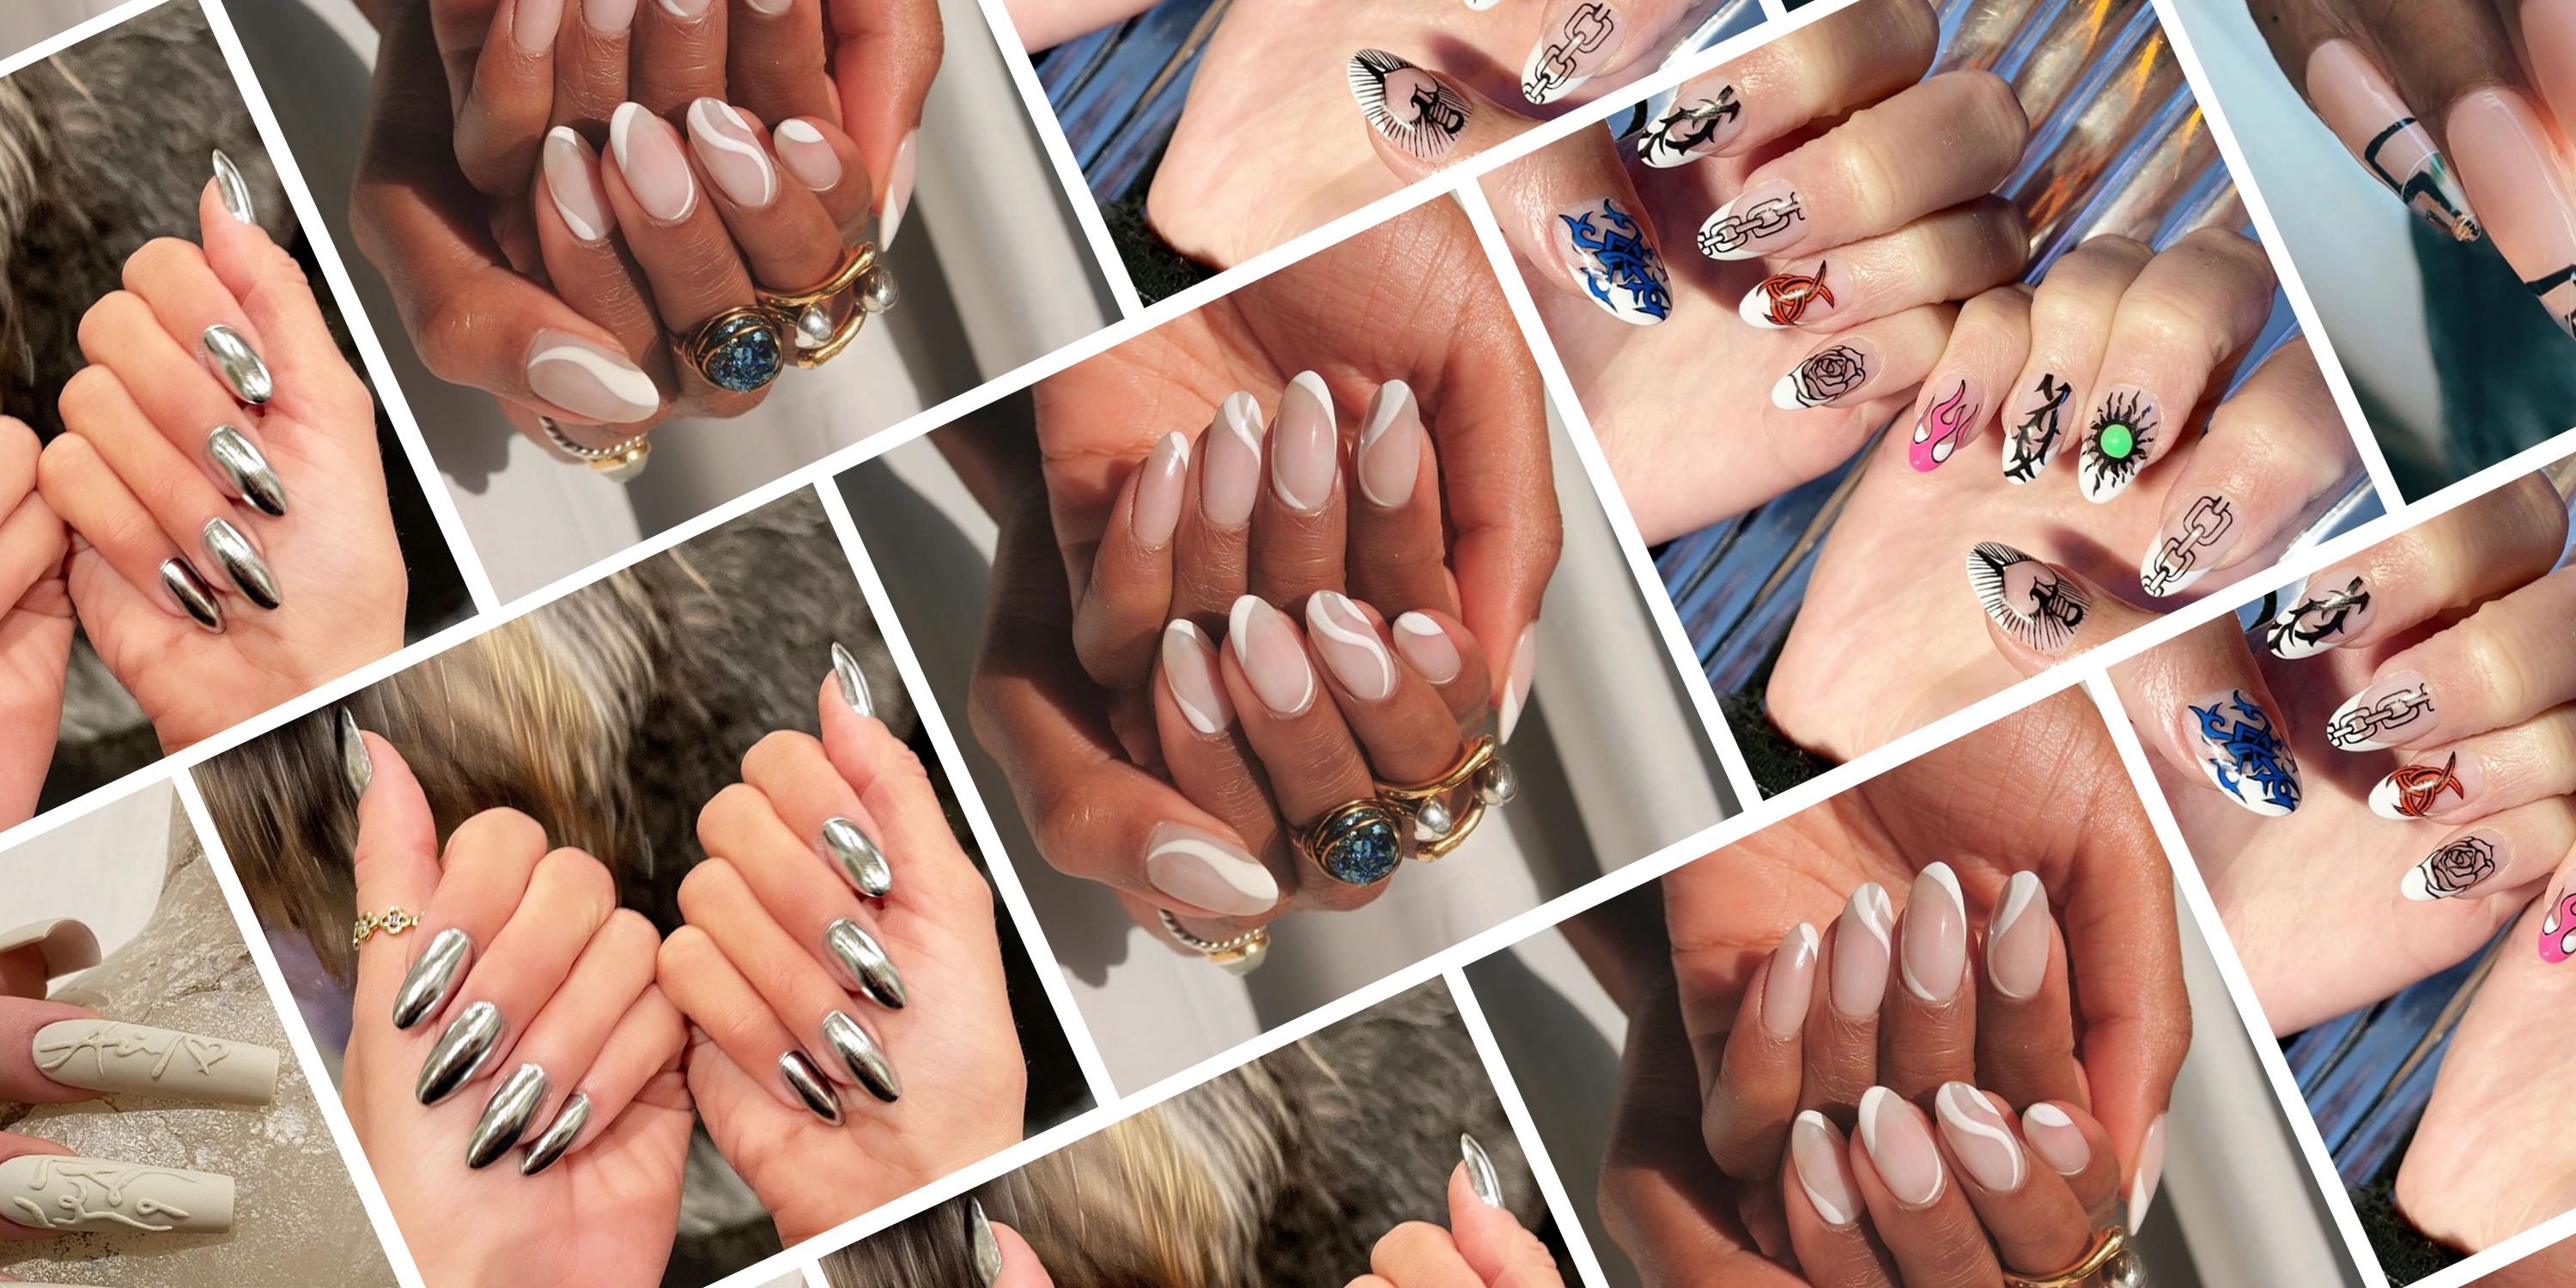 2. 50+ Best Nail Designs of 2021 - Nail Art Trends to Try This Year - wide 8